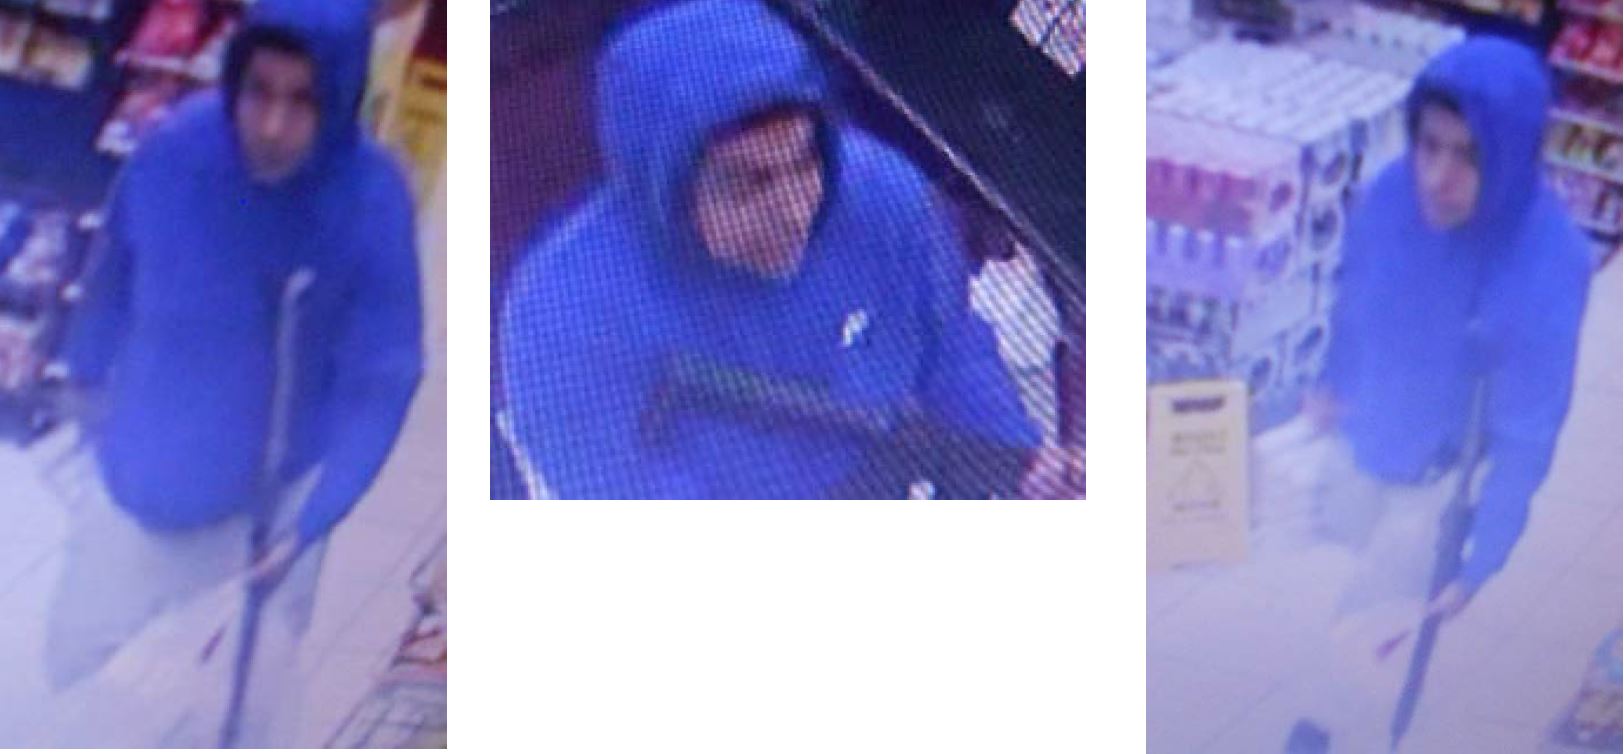 Store footage collage of male robbery suspect wearing a bright blue hoodie and light gray sweatpants.